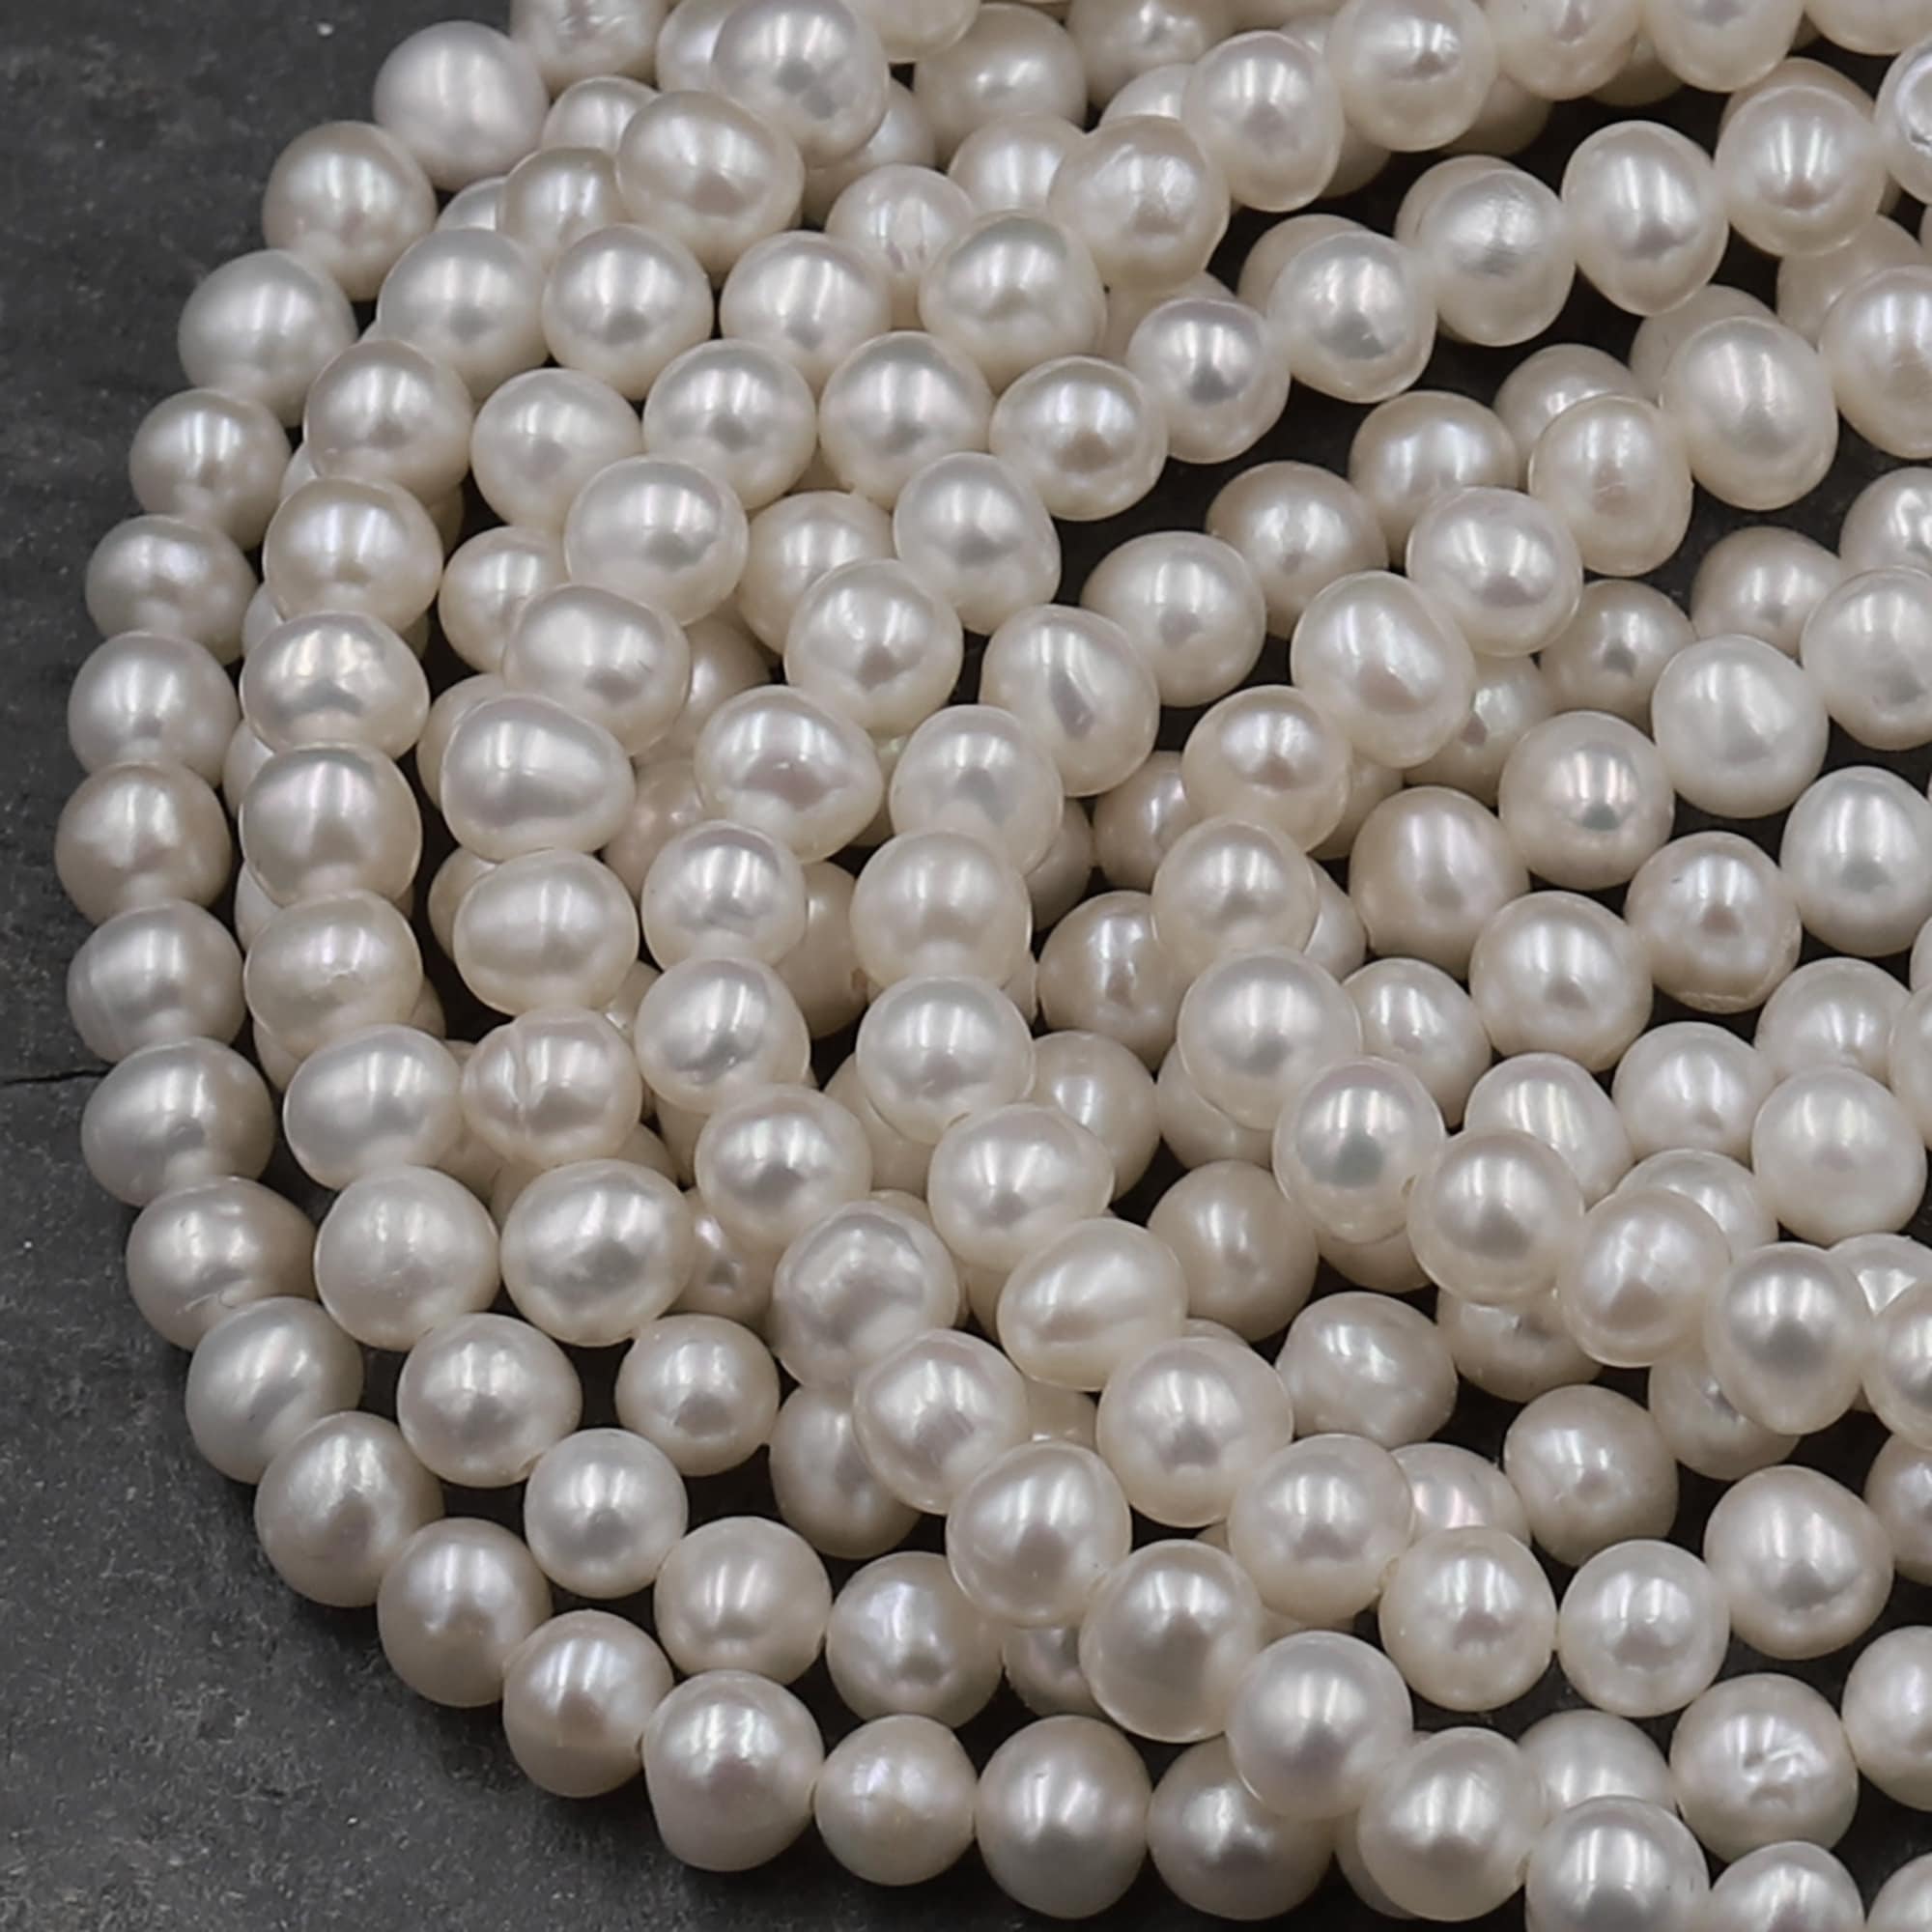 String of pearls,beads for crafts,craft beads,crafting beads,strand of  beads,pearl beads,craft pearls,accent beads,strand of pearls,trim,196